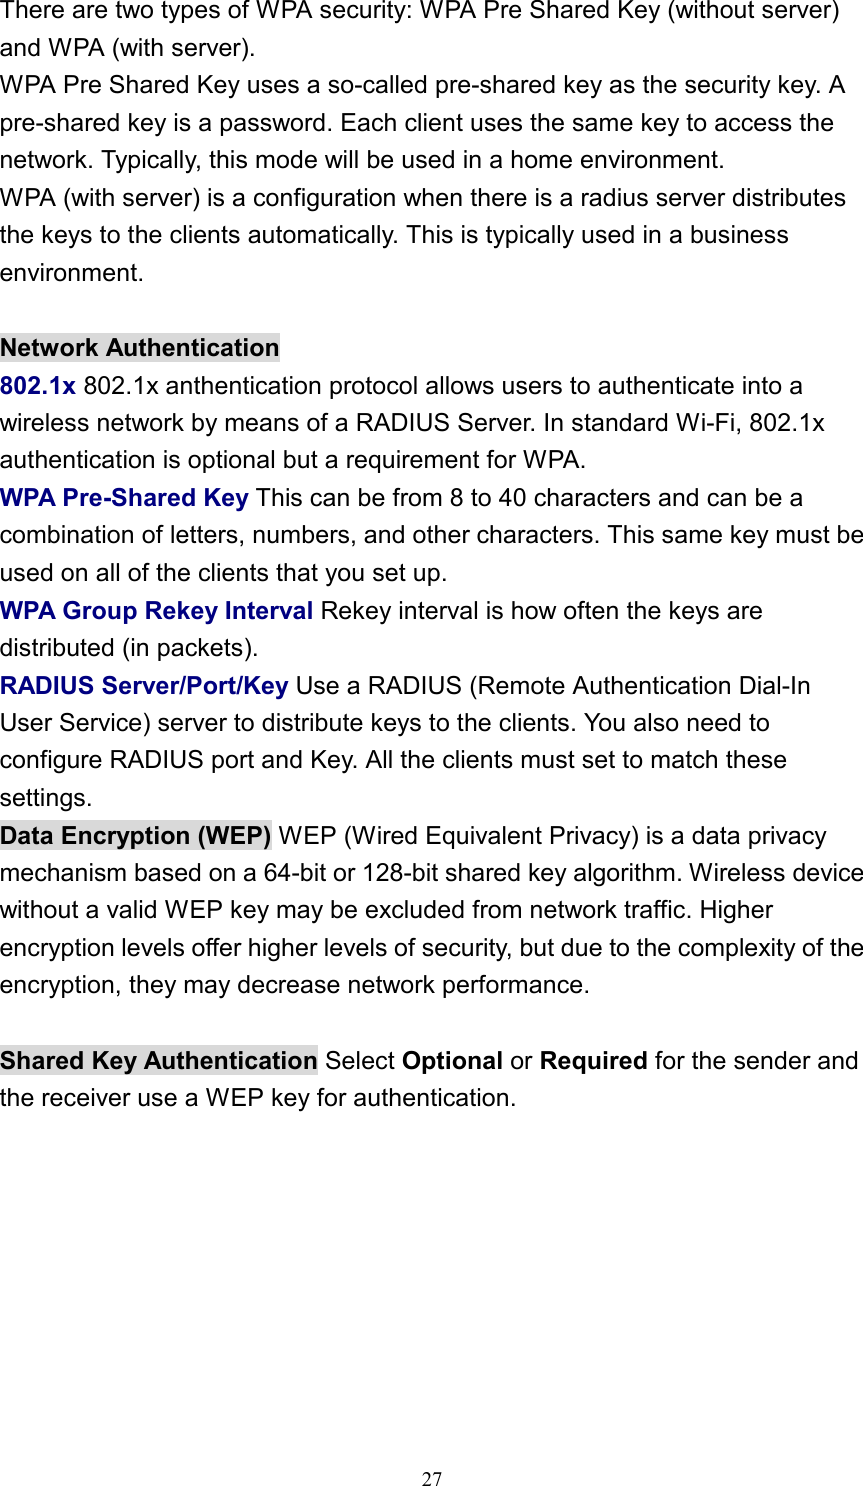 There are two types of WPA security: WPA Pre Shared Key (without server) and WPA (with server). WPA Pre Shared Key uses a so-called pre-shared key as the security key. A pre-shared key is a password. Each client uses the same key to access the network. Typically, this mode will be used in a home environment. WPA (with server) is a configuration when there is a radius server distributes the keys to the clients automatically. This is typically used in a business environment.  Network Authentication 802.1x 802.1x anthentication protocol allows users to authenticate into a wireless network by means of a RADIUS Server. In standard Wi-Fi, 802.1x authentication is optional but a requirement for WPA. WPA Pre-Shared Key This can be from 8 to 40 characters and can be a combination of letters, numbers, and other characters. This same key must be used on all of the clients that you set up. WPA Group Rekey Interval Rekey interval is how often the keys are distributed (in packets). RADIUS Server/Port/Key Use a RADIUS (Remote Authentication Dial-In User Service) server to distribute keys to the clients. You also need to configure RADIUS port and Key. All the clients must set to match these settings. Data Encryption (WEP) WEP (Wired Equivalent Privacy) is a data privacy mechanism based on a 64-bit or 128-bit shared key algorithm. Wireless device without a valid WEP key may be excluded from network traffic. Higher encryption levels offer higher levels of security, but due to the complexity of the encryption, they may decrease network performance.  Shared Key Authentication Select Optional or Required for the sender and the receiver use a WEP key for authentication.   27